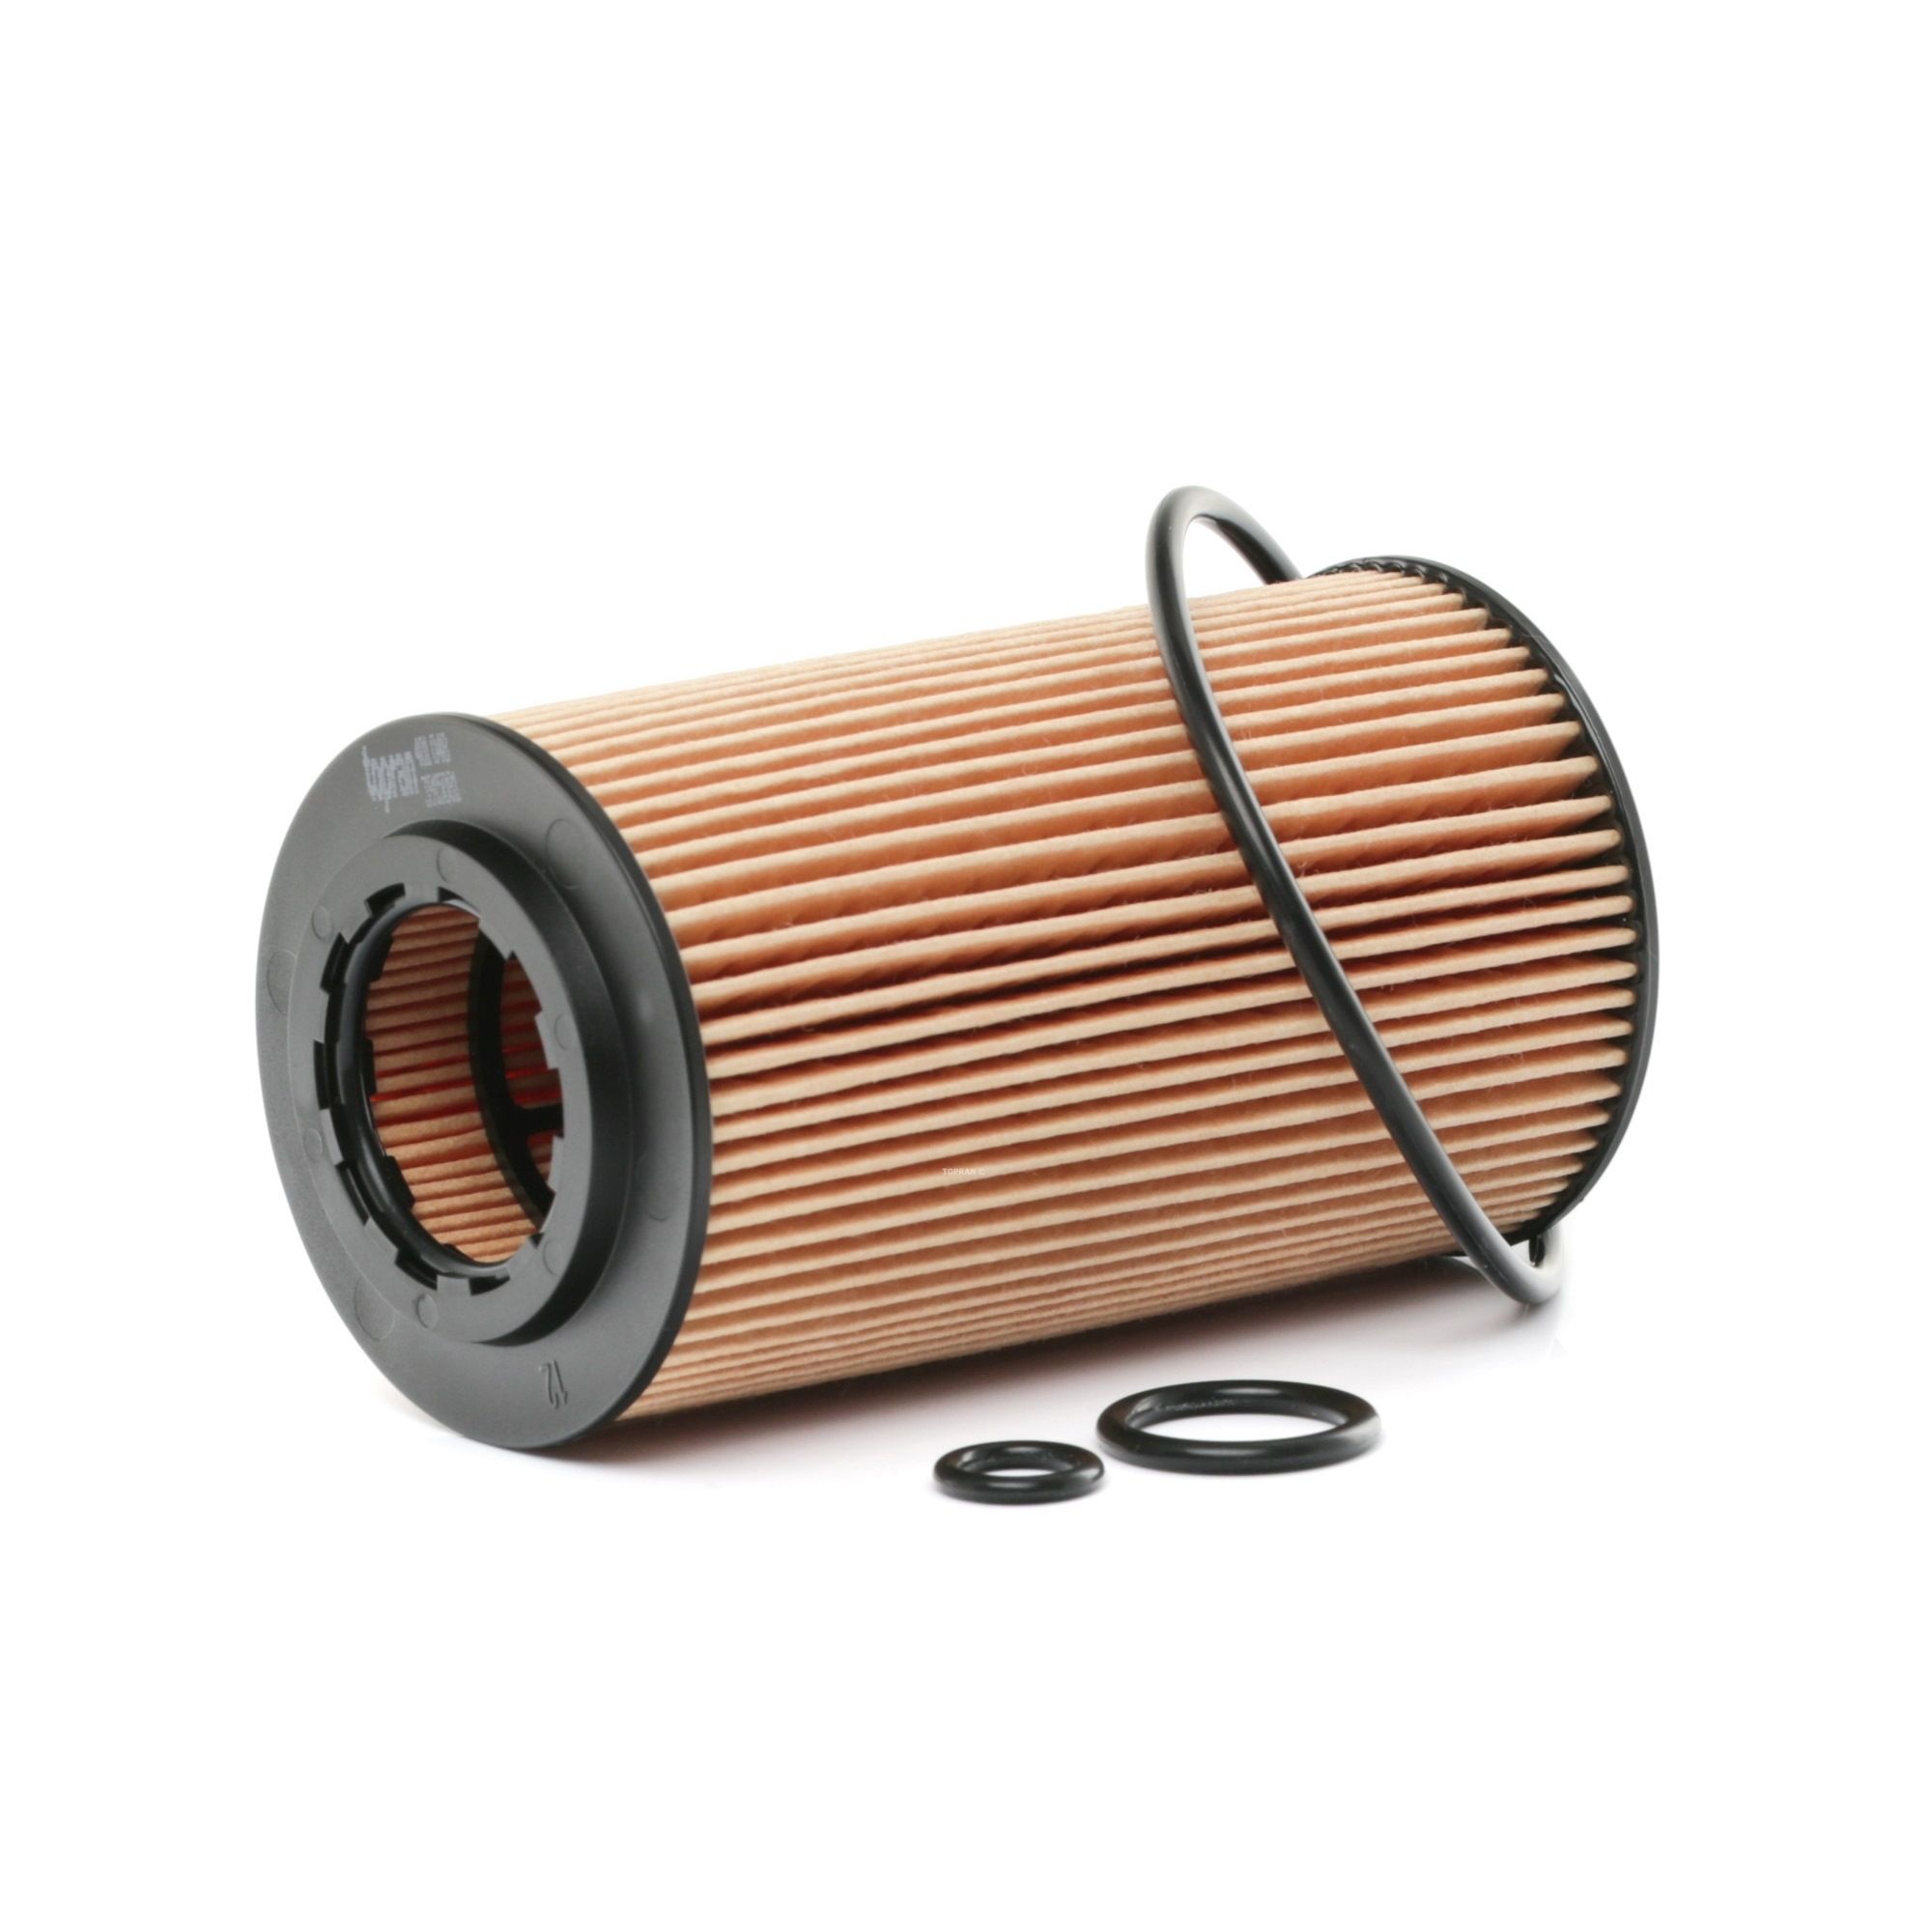 401 048 TOPRAN Oil filters SMART with gaskets/seals, Filter Insert